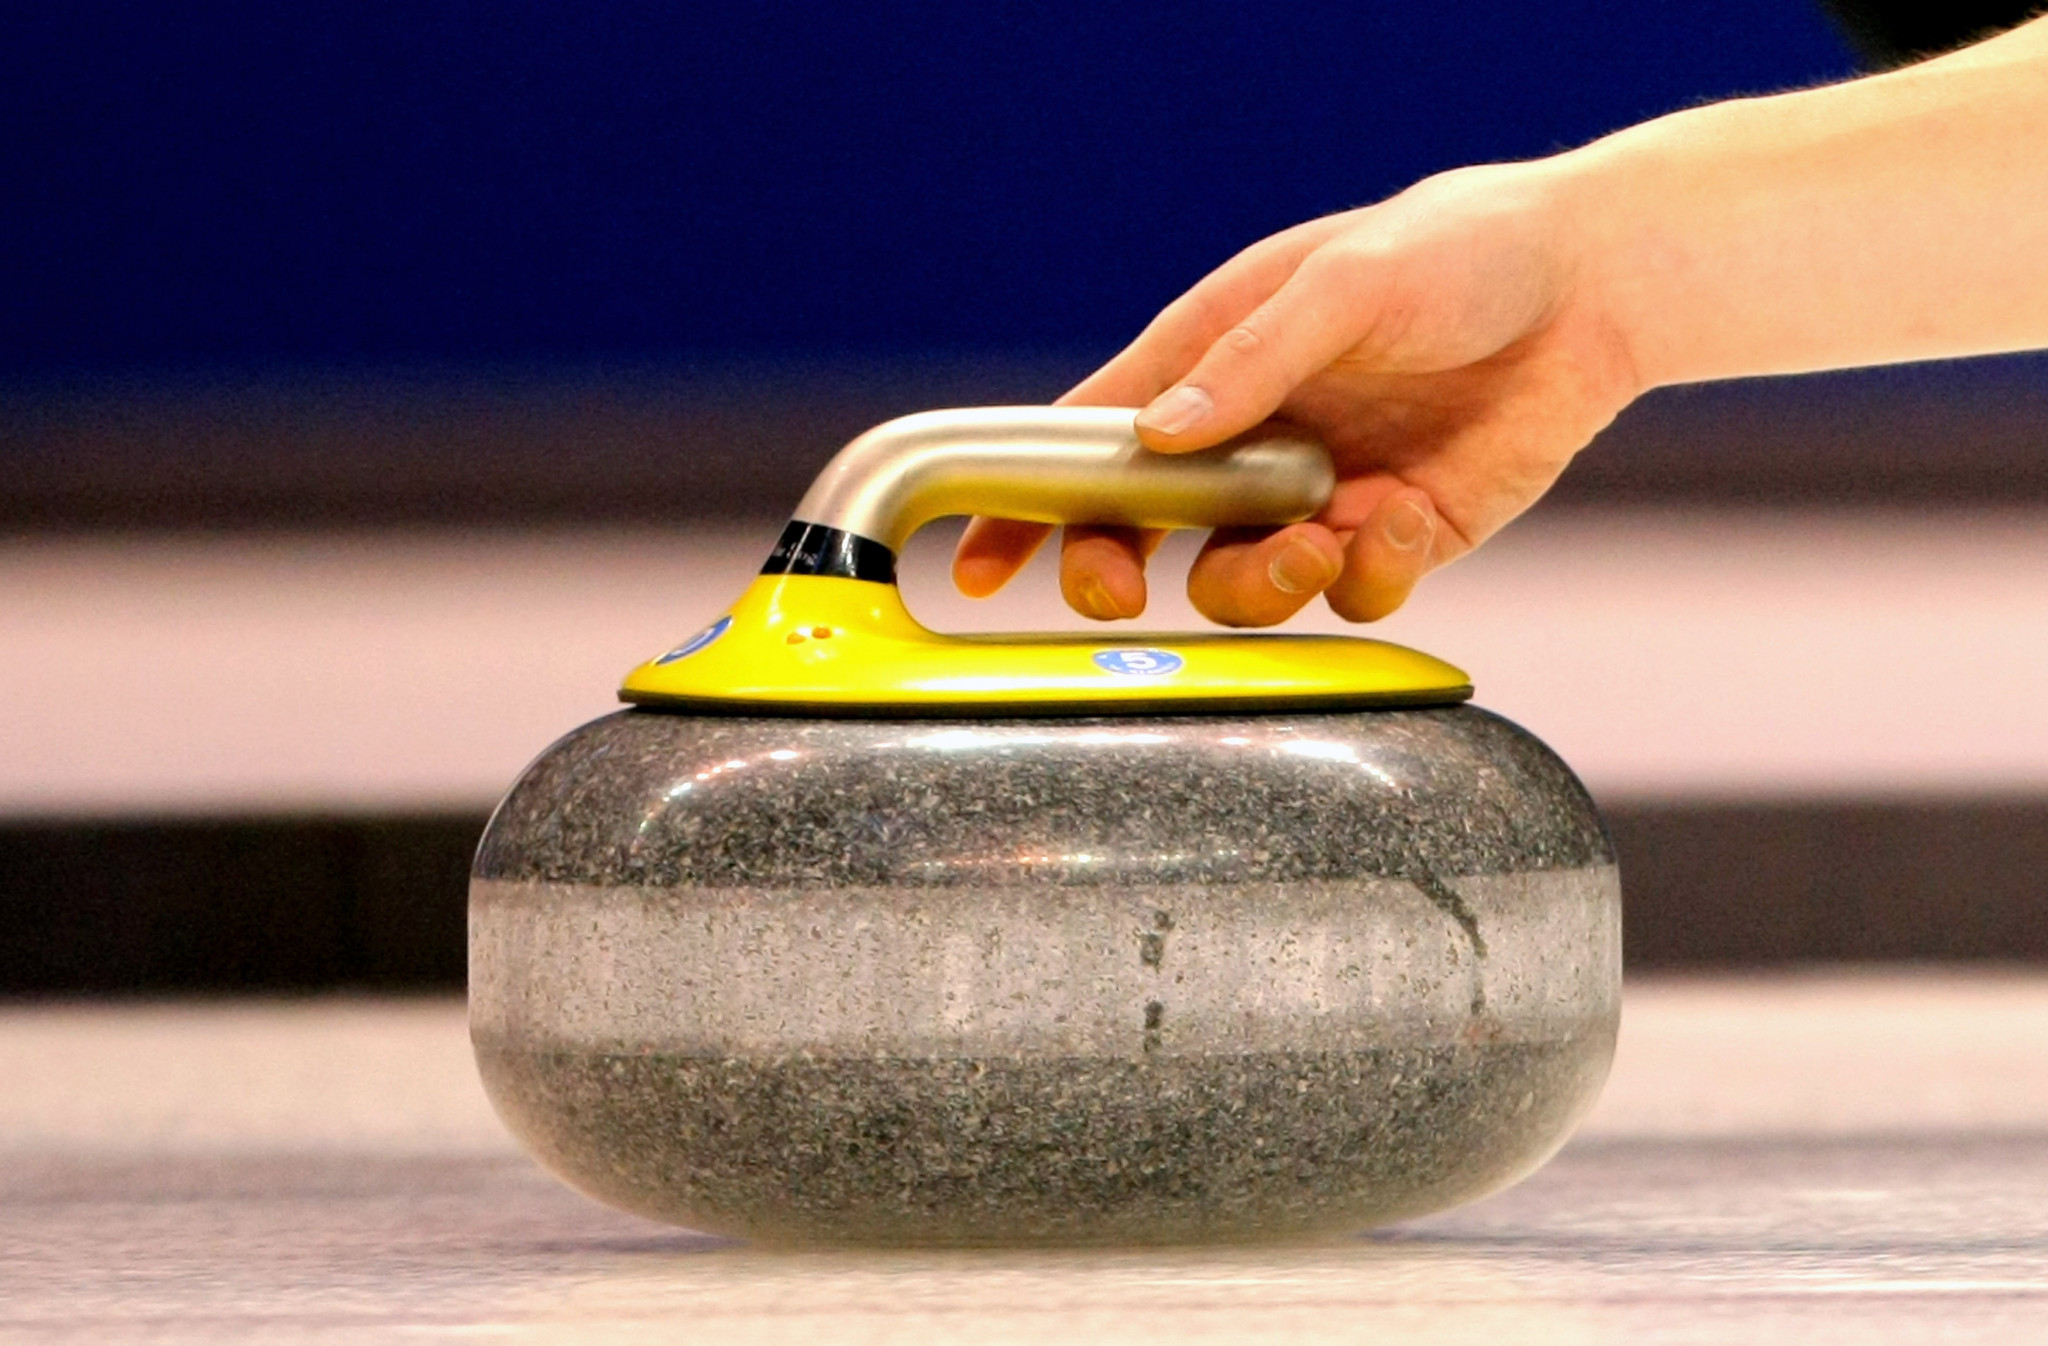 Replacement teams selected for World Curling Championships following suspension of Russia